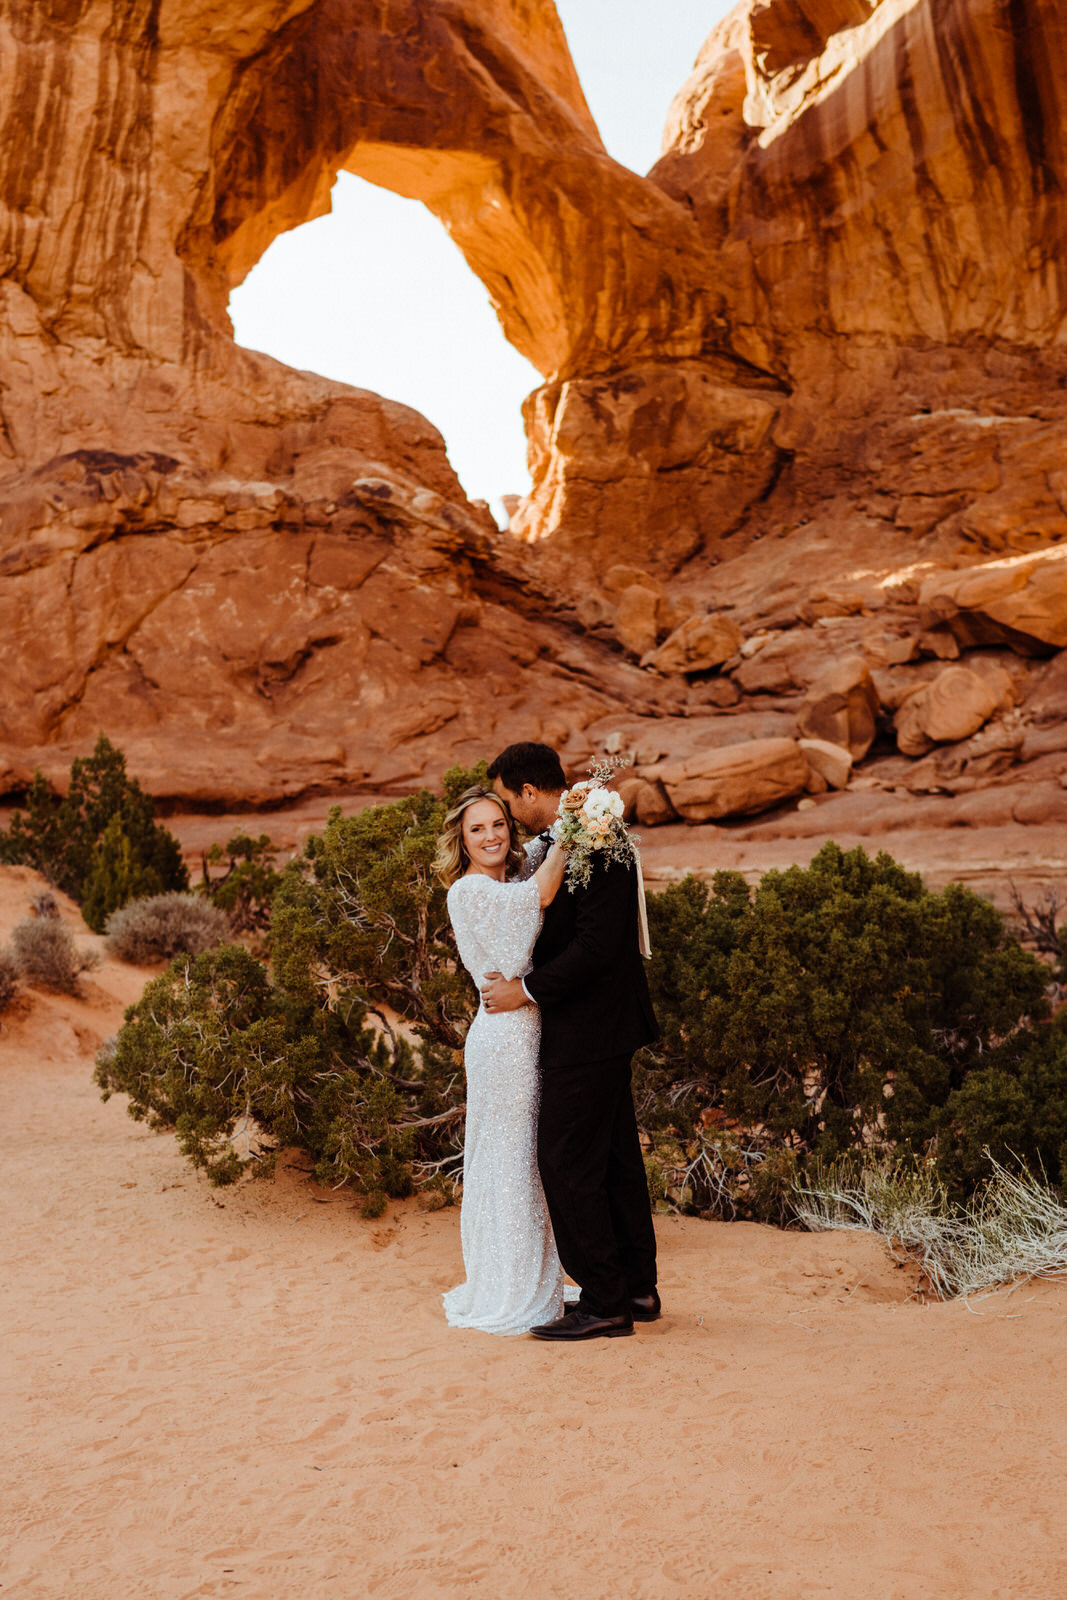 Arches-National-Park-Wedding-Glamorous-Bride-and-Groom-on-Trail (3).jpg